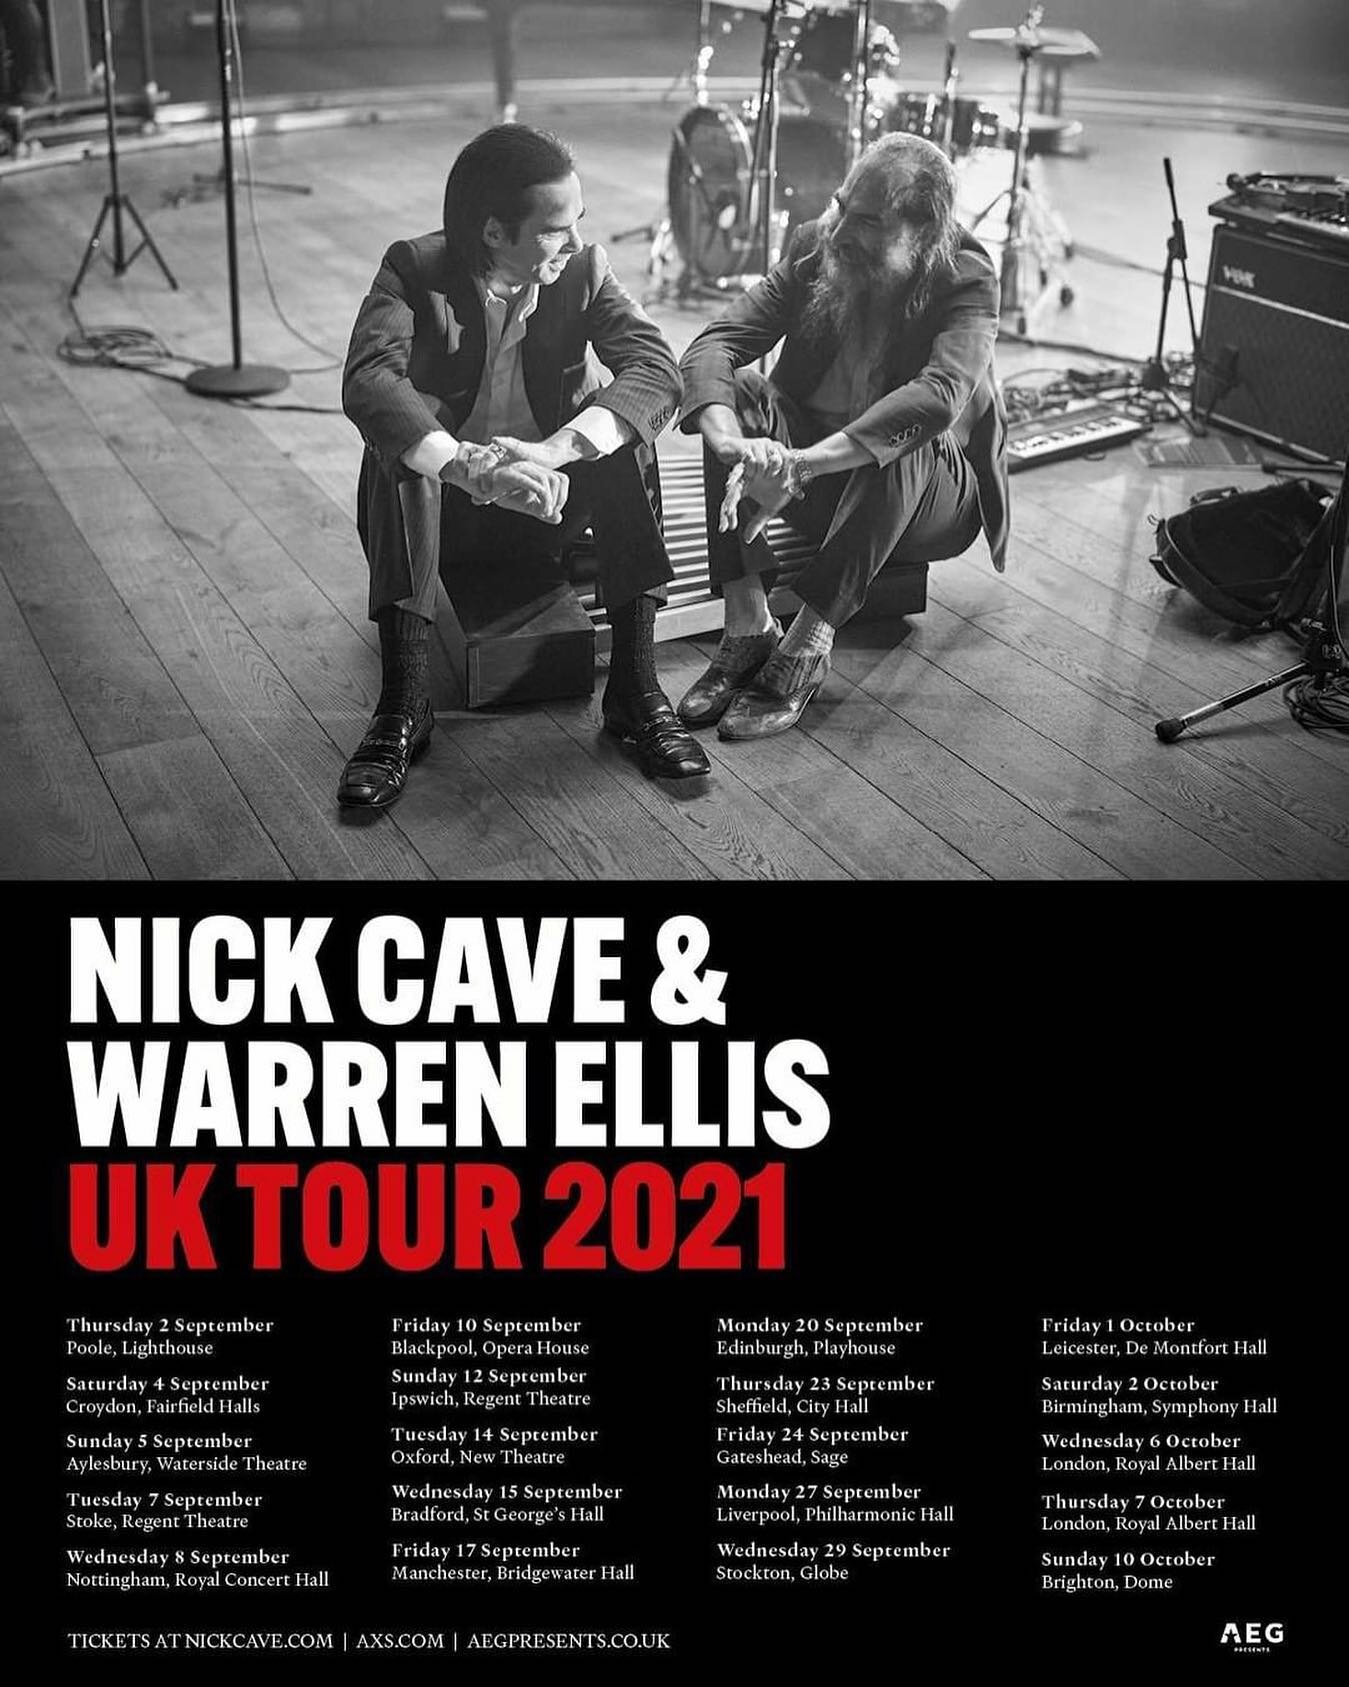 Nick Cave &amp; Warren Ellis UK Tour 2021 - This September and October Nick Cave &amp; Warren Ellis will play 20 shows in the UK. 
Tickets on sale Friday 23 July at 10am BST at nickcave.com

2 September - Lighthouse, Poole
4 September - Fairfield Hal